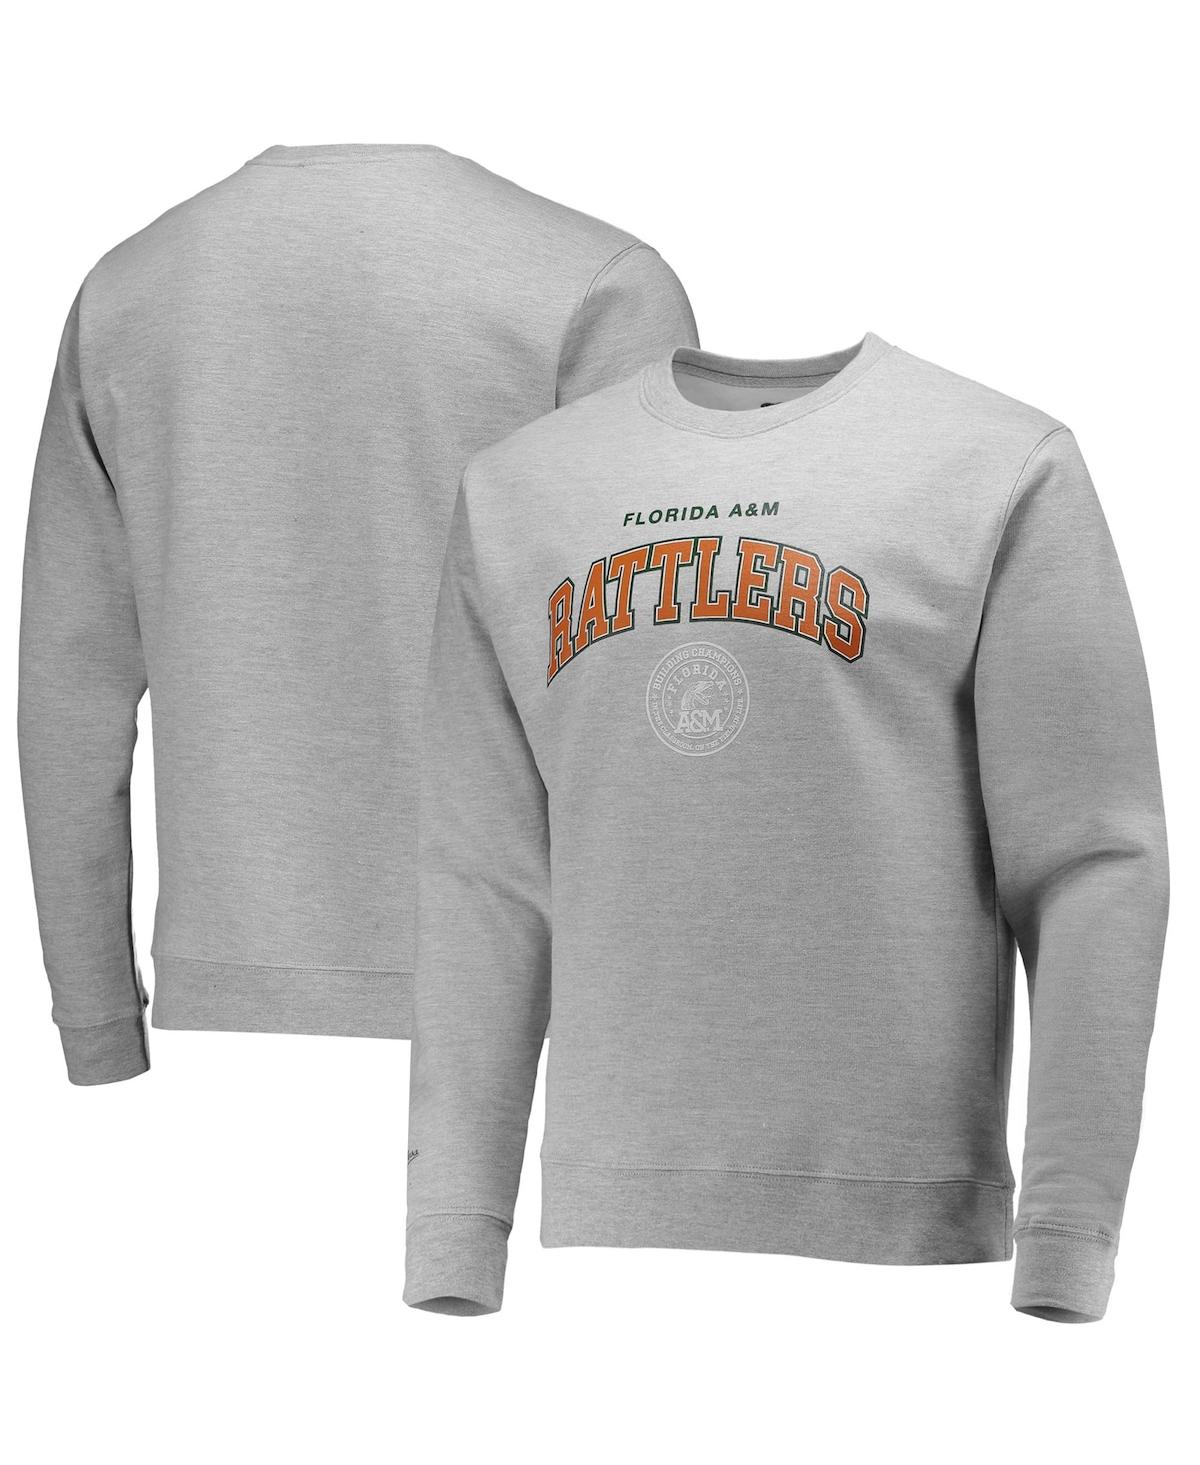 MITCHELL & NESS MEN'S MITCHELL & NESS HEATHERED GRAY FLORIDA A&M RATTLERS CLASSIC ARCH PULLOVER SWEATSHIRT